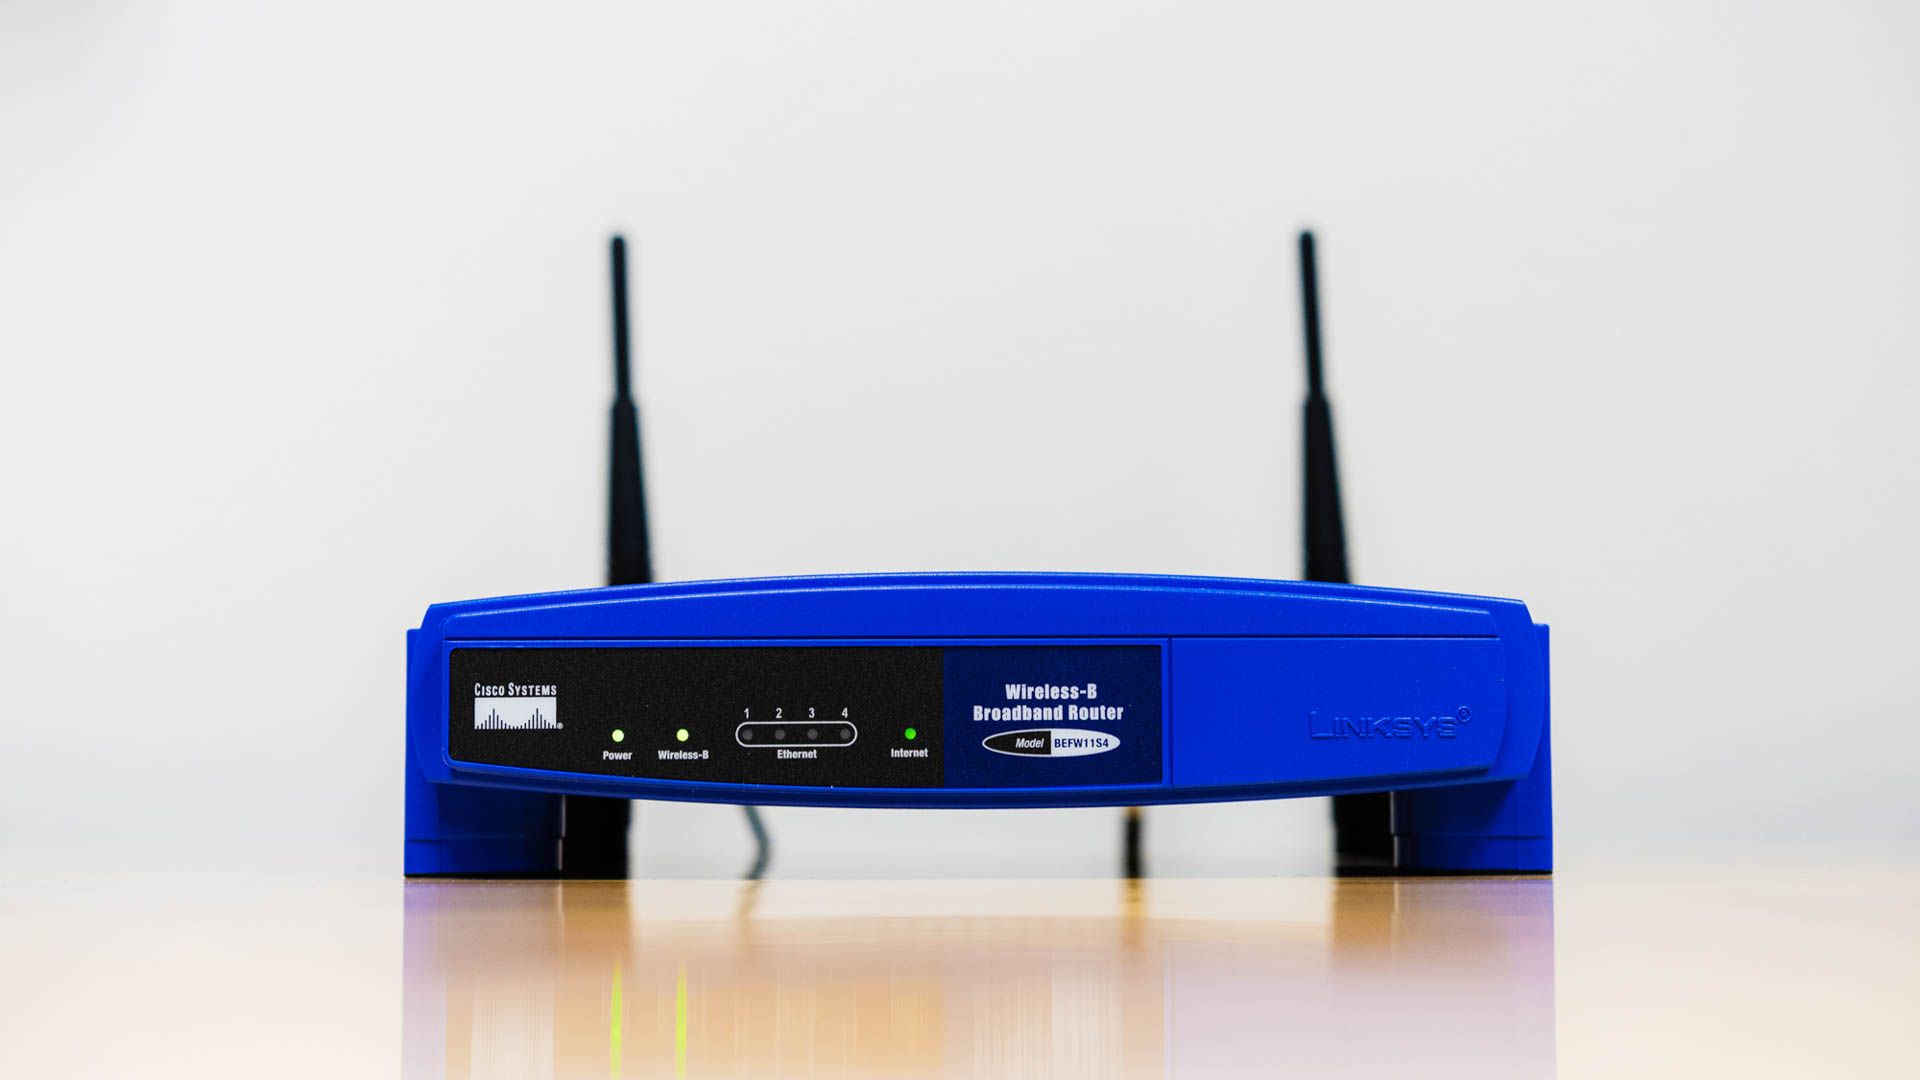 is-your-router’s-wi-fi-performance-limiting-your-internet-speed?-here’s-how-to-tell